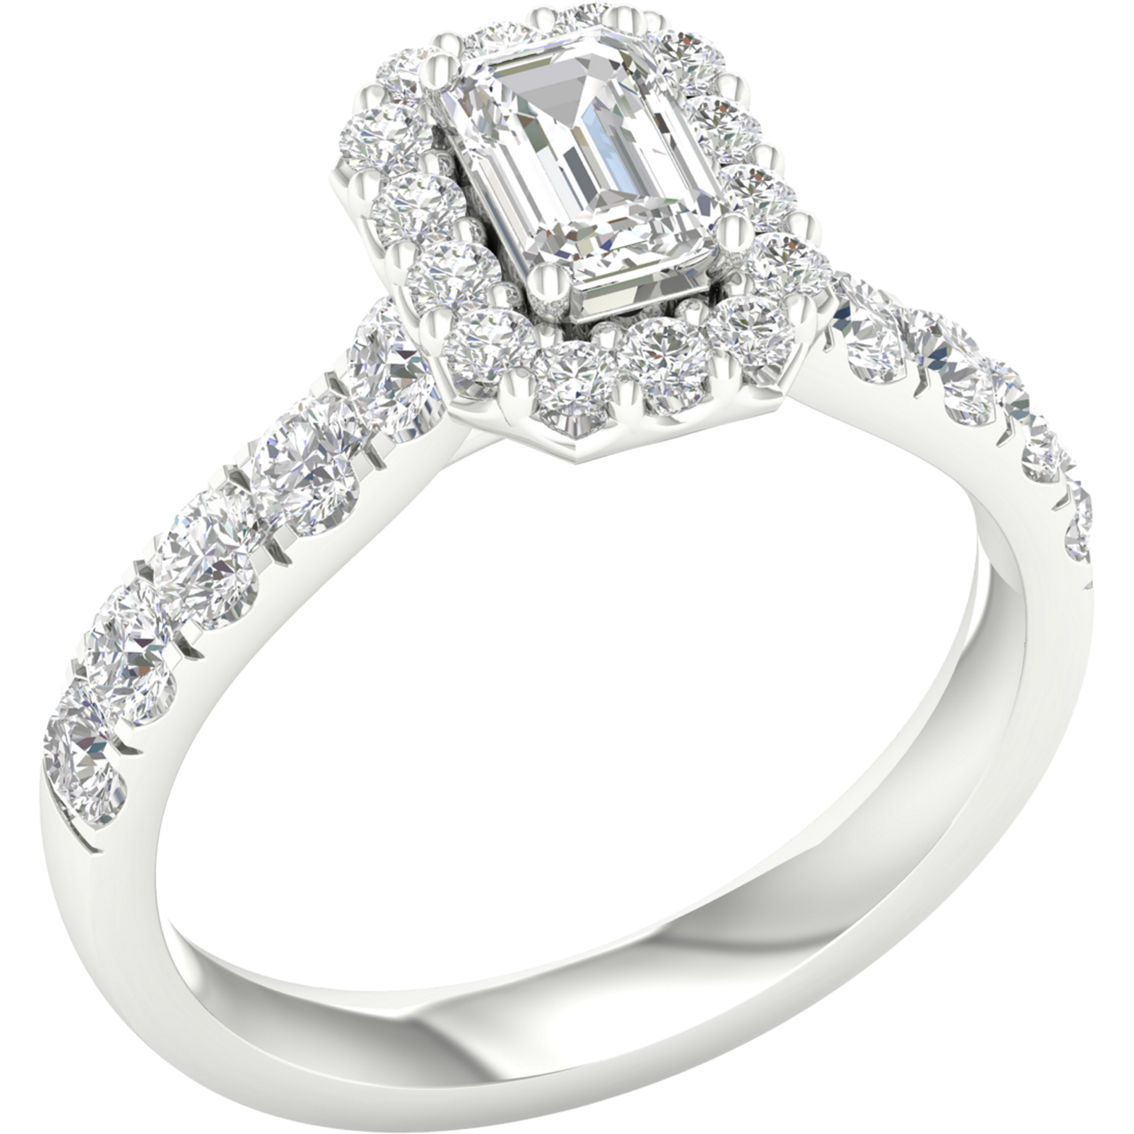 Pure Brilliance 14K White Gold 1 1/2 CTW Engagement Ring with IGI Certification - Image 2 of 2